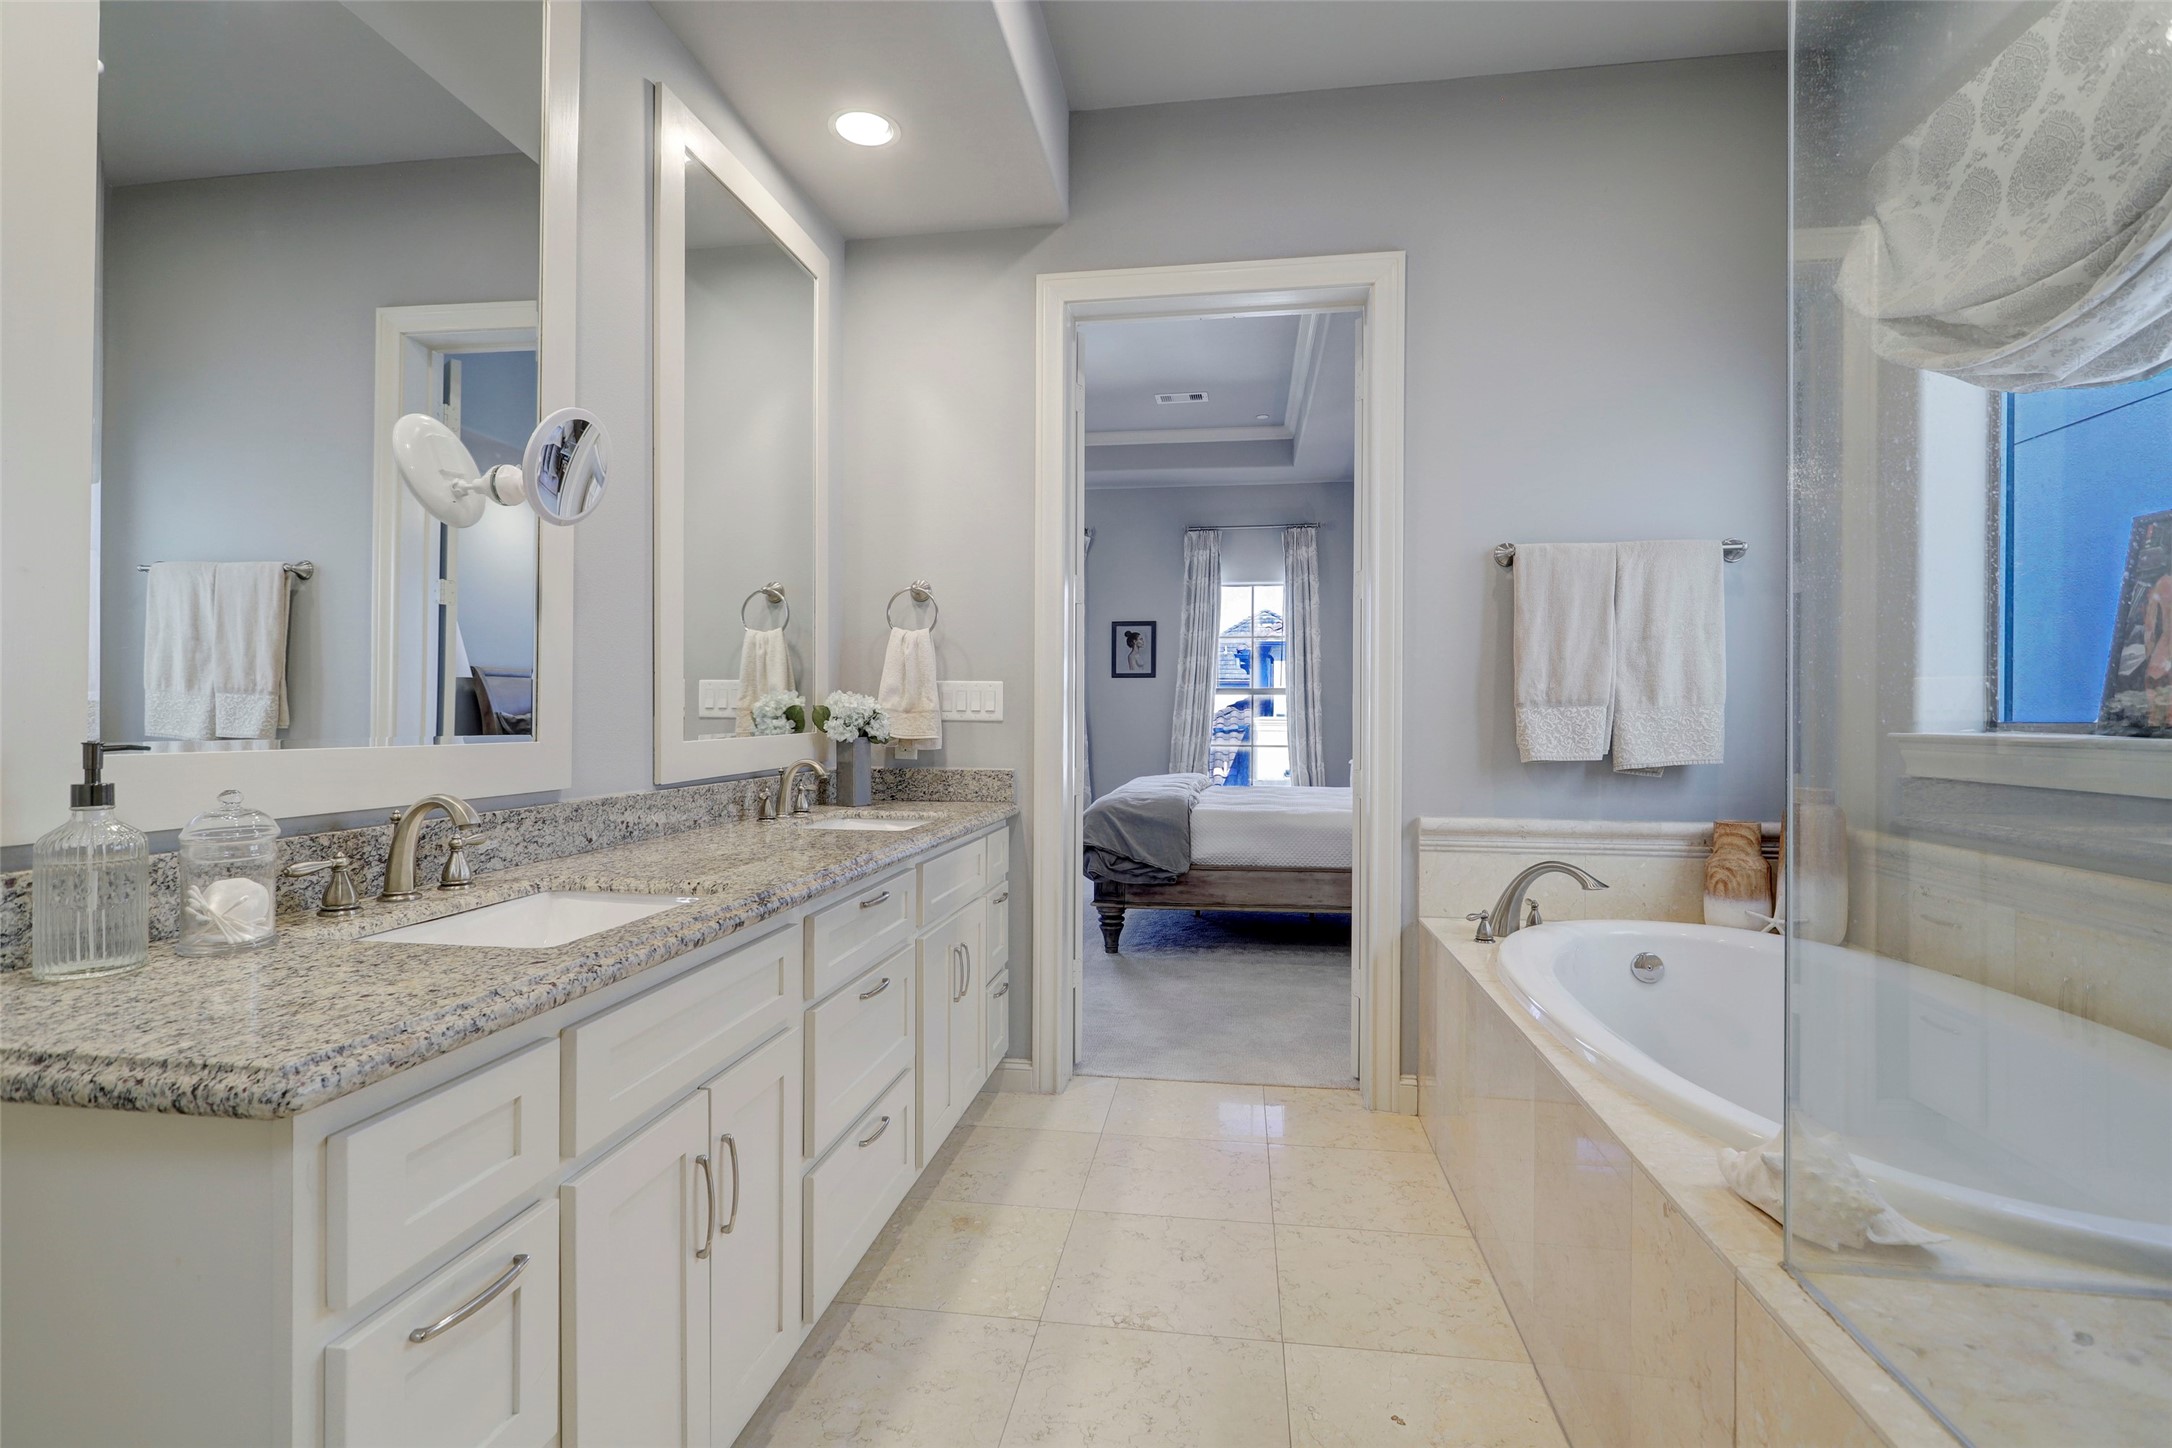 Primary bathroom with natural light , double sinks, soaking tub, separate shower, and bountiful storage.